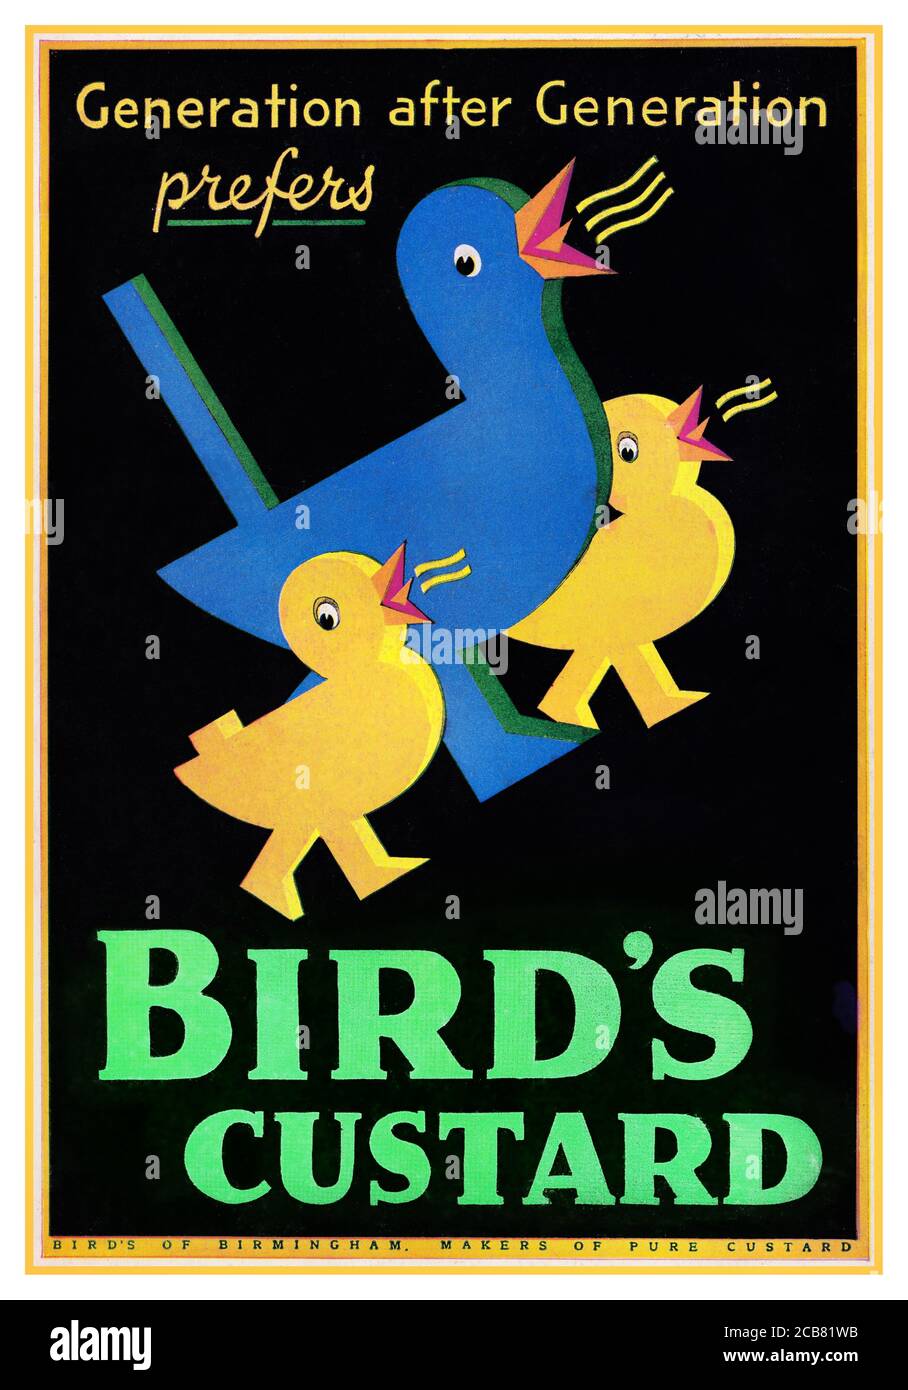 Vintage Food Poster Birds Custard ad poster from 1933. Food Poster Bird’s Custard invented by the Chemist Alfred Bird in 1837, essentially, because his custard-loving wife was allergic to eggs – the main ingredient used in the traditional recipe. Generation after Generation prefers BIRDS CUSTARD Stock Photo